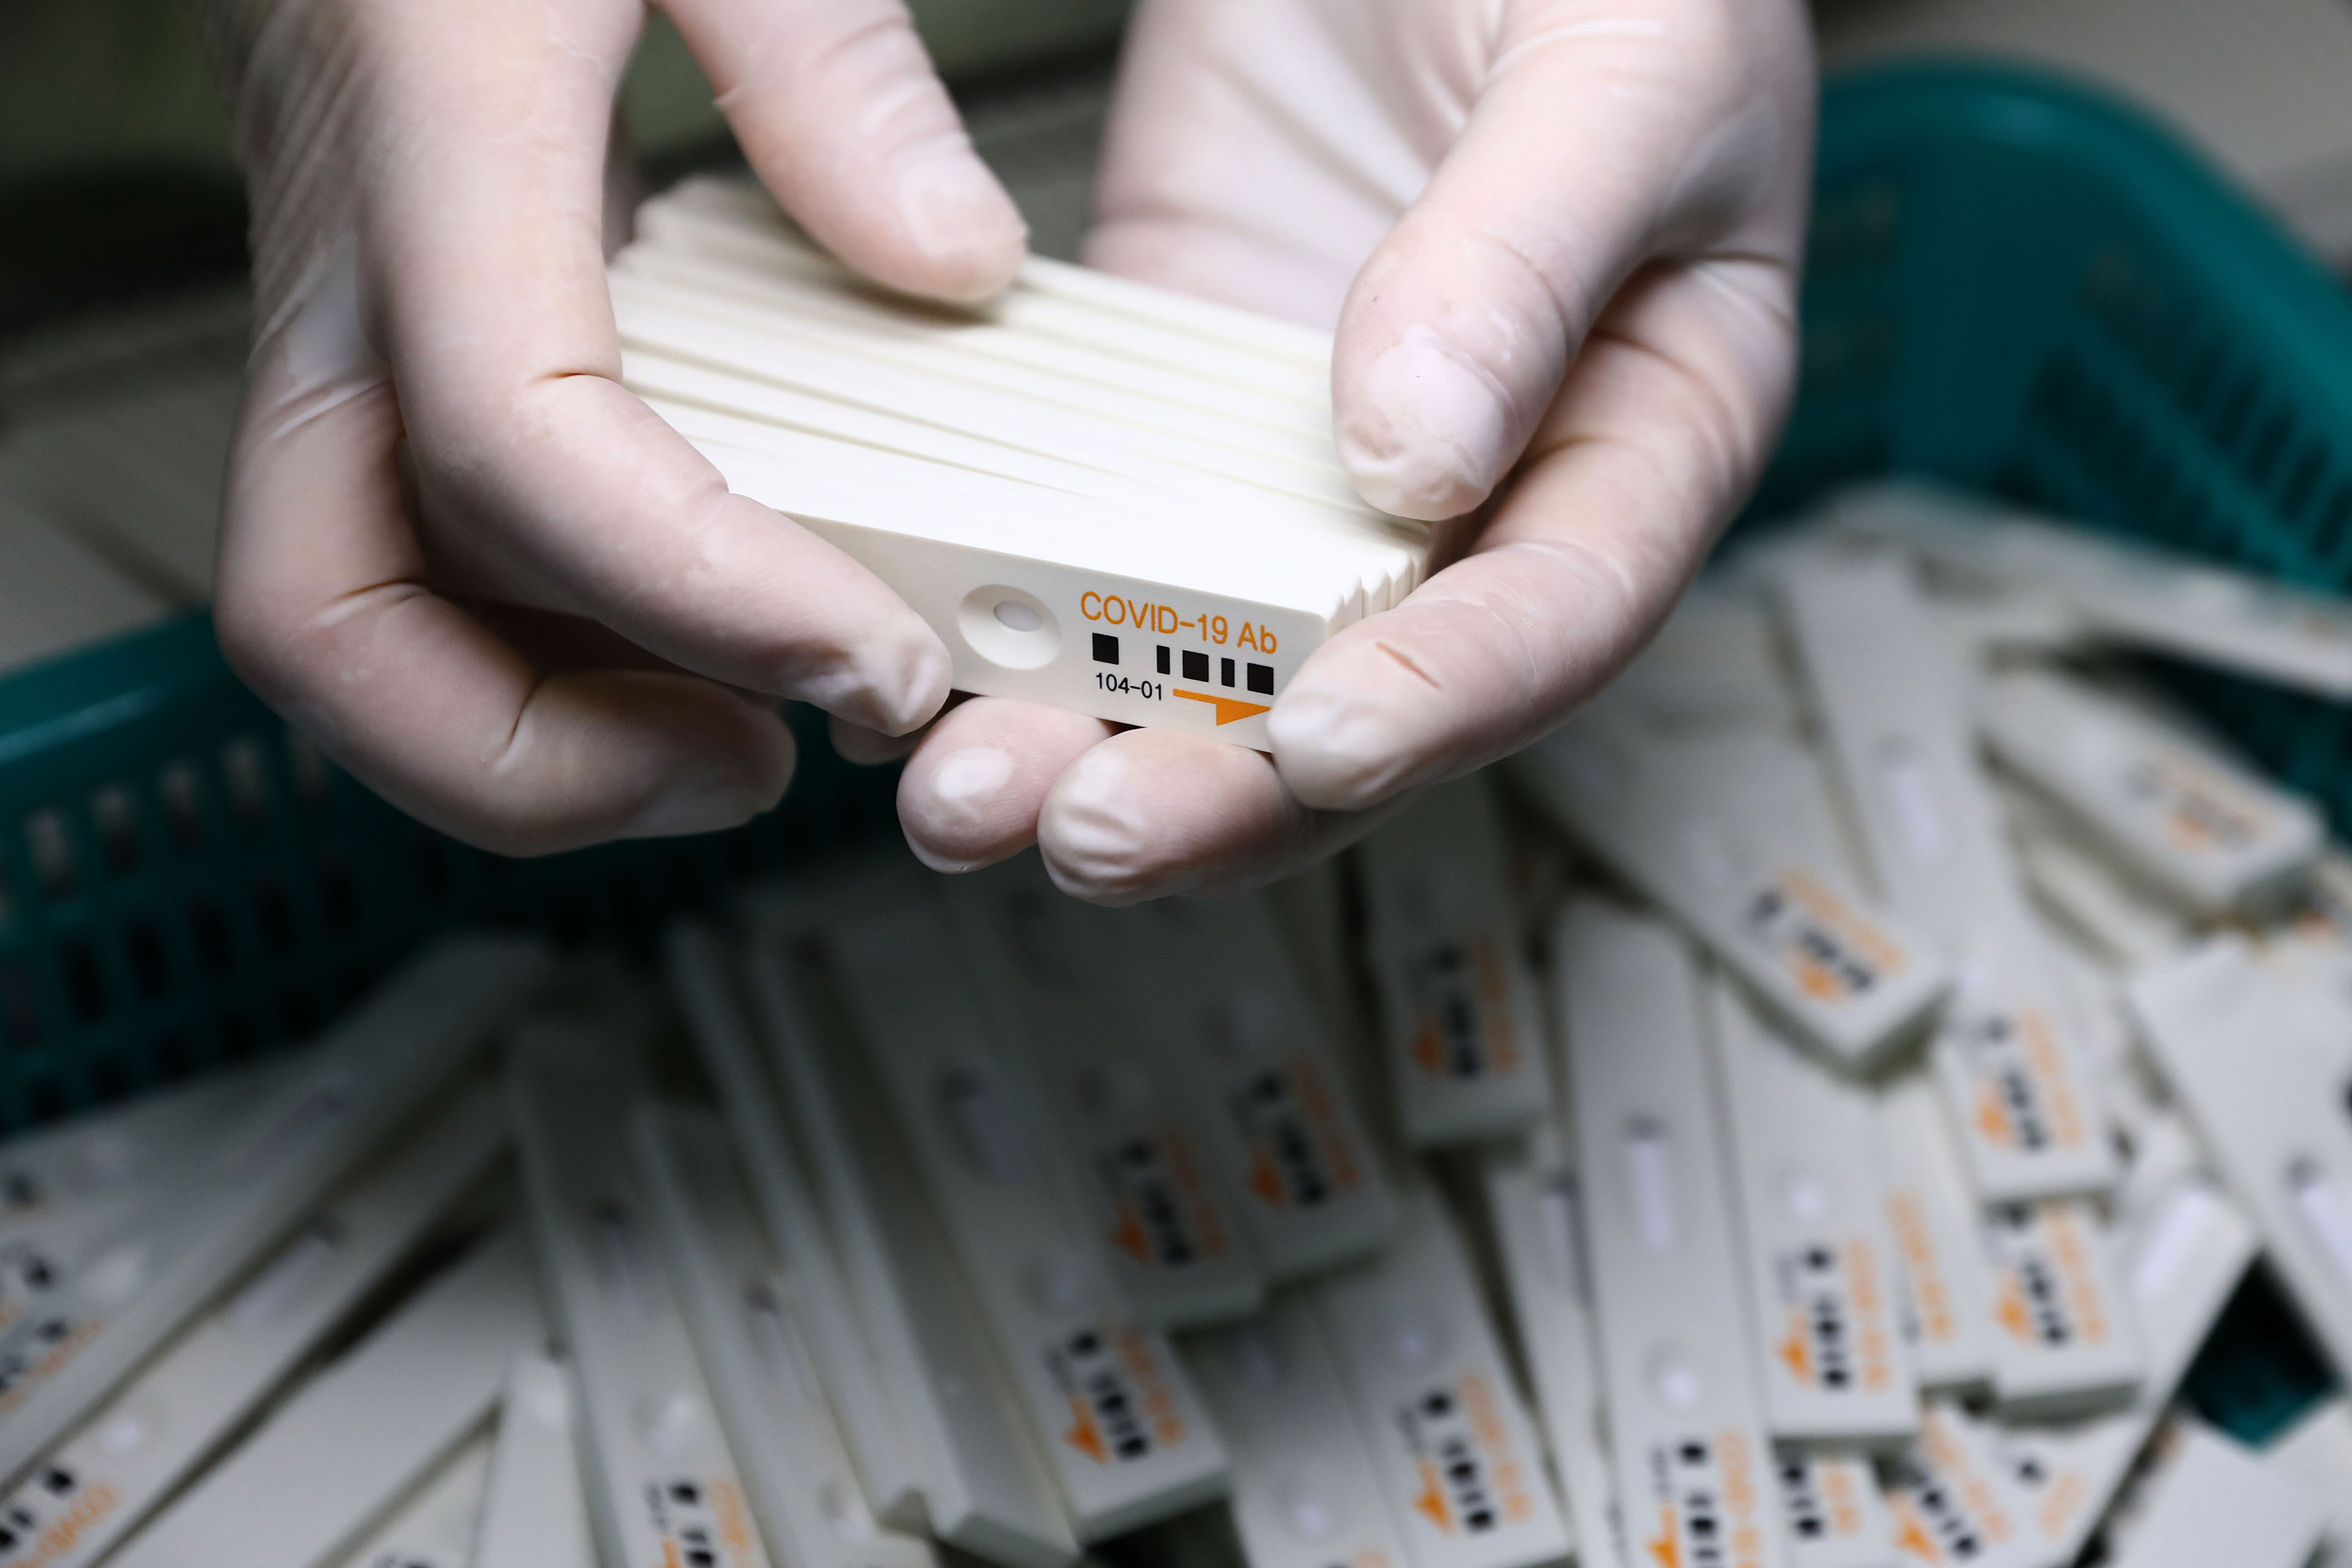 An employee holds coronavirus testing kits at the Boditech Med Inc. headquarters on April 17, in Chuncheon, South Korea.